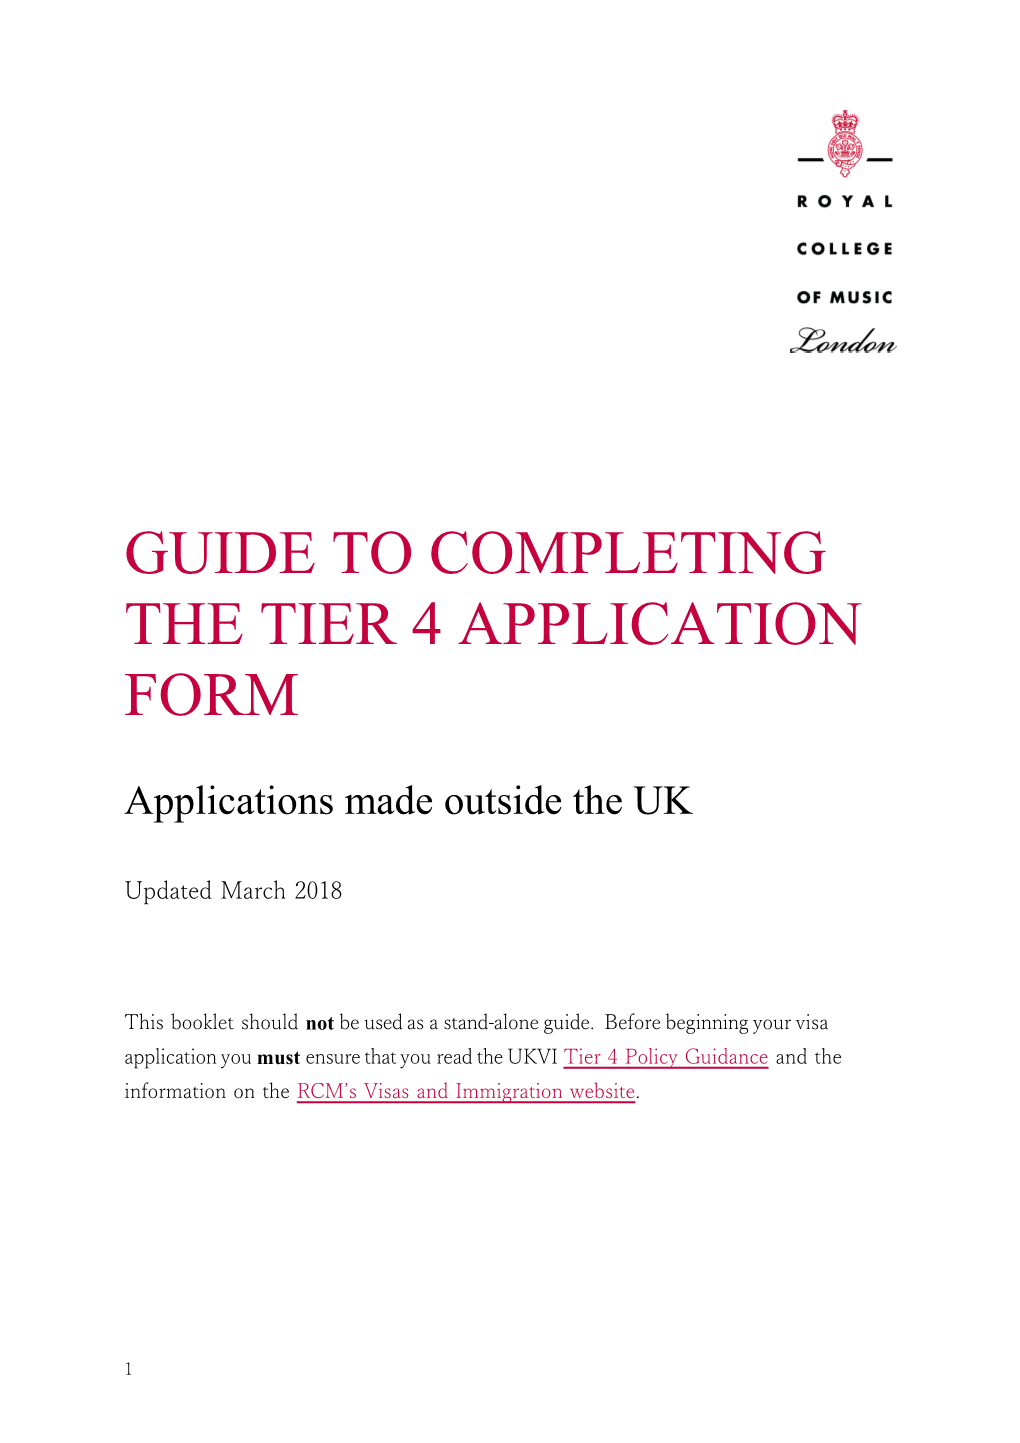 Guide to Completing the Tier 4 Application Form